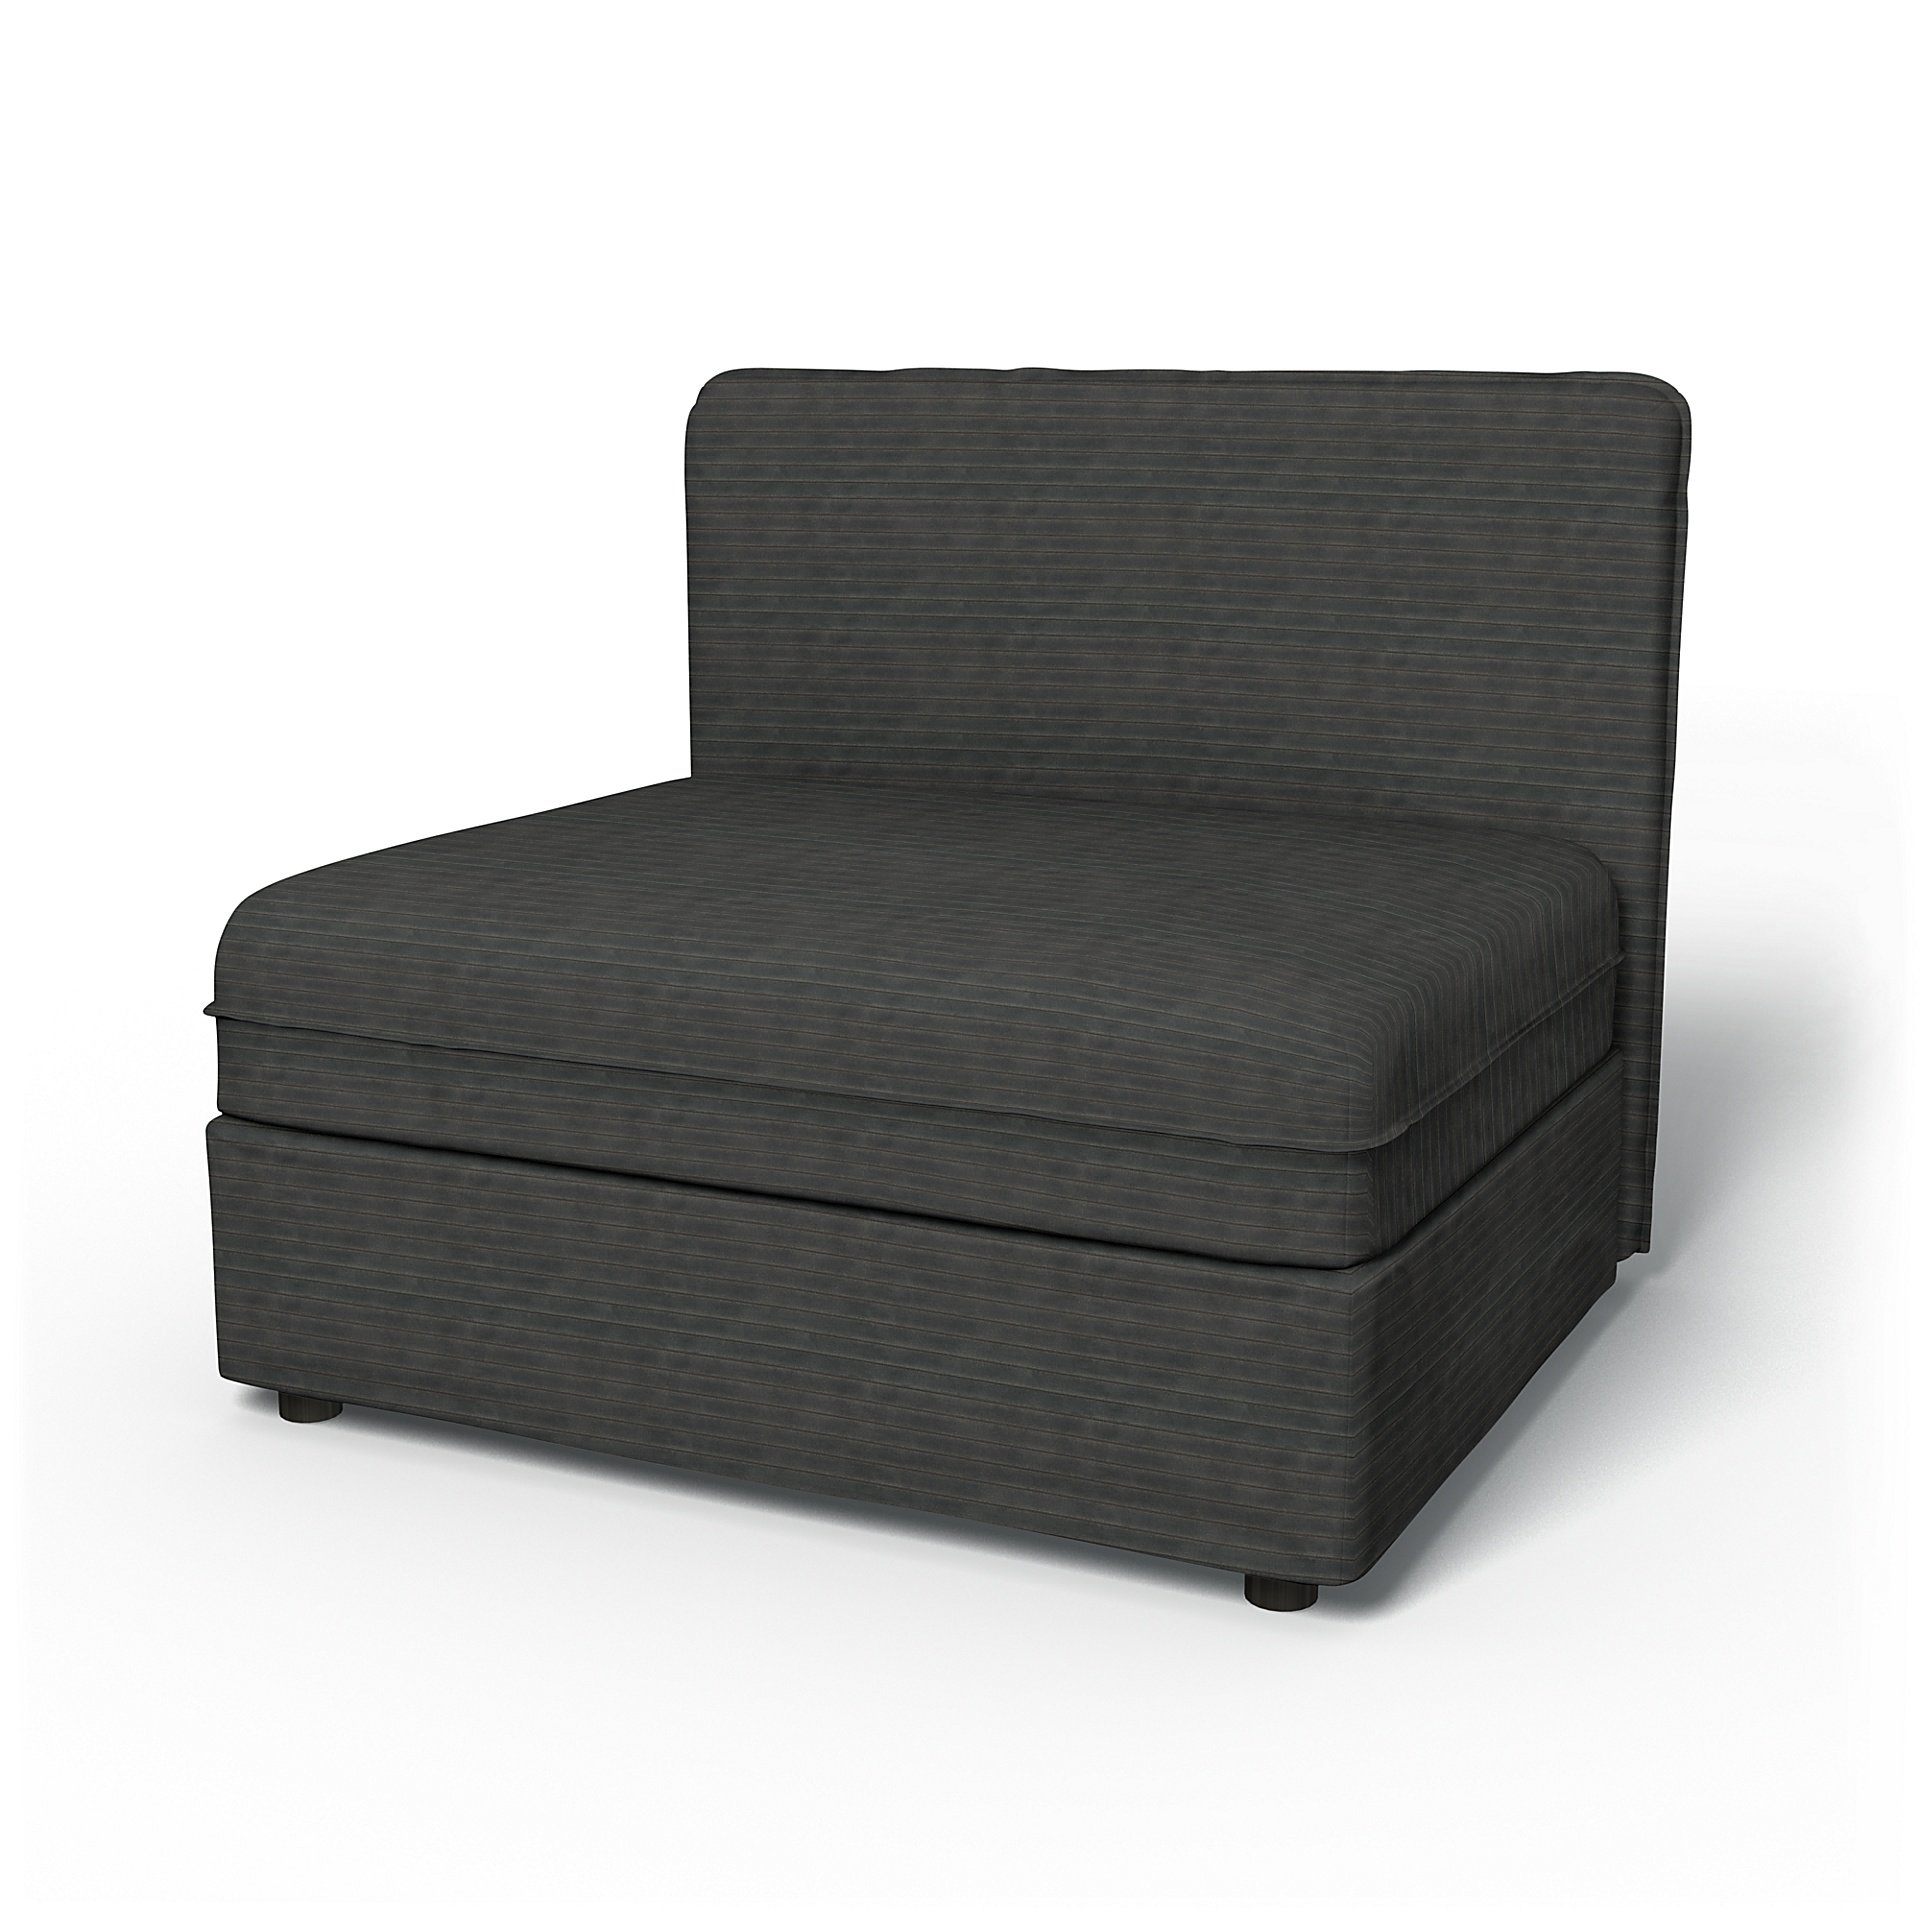 IKEA - Vallentuna Seat Module with Low Back Cover 100x80cm 39x32in, Licorice, Corduroy - Bemz